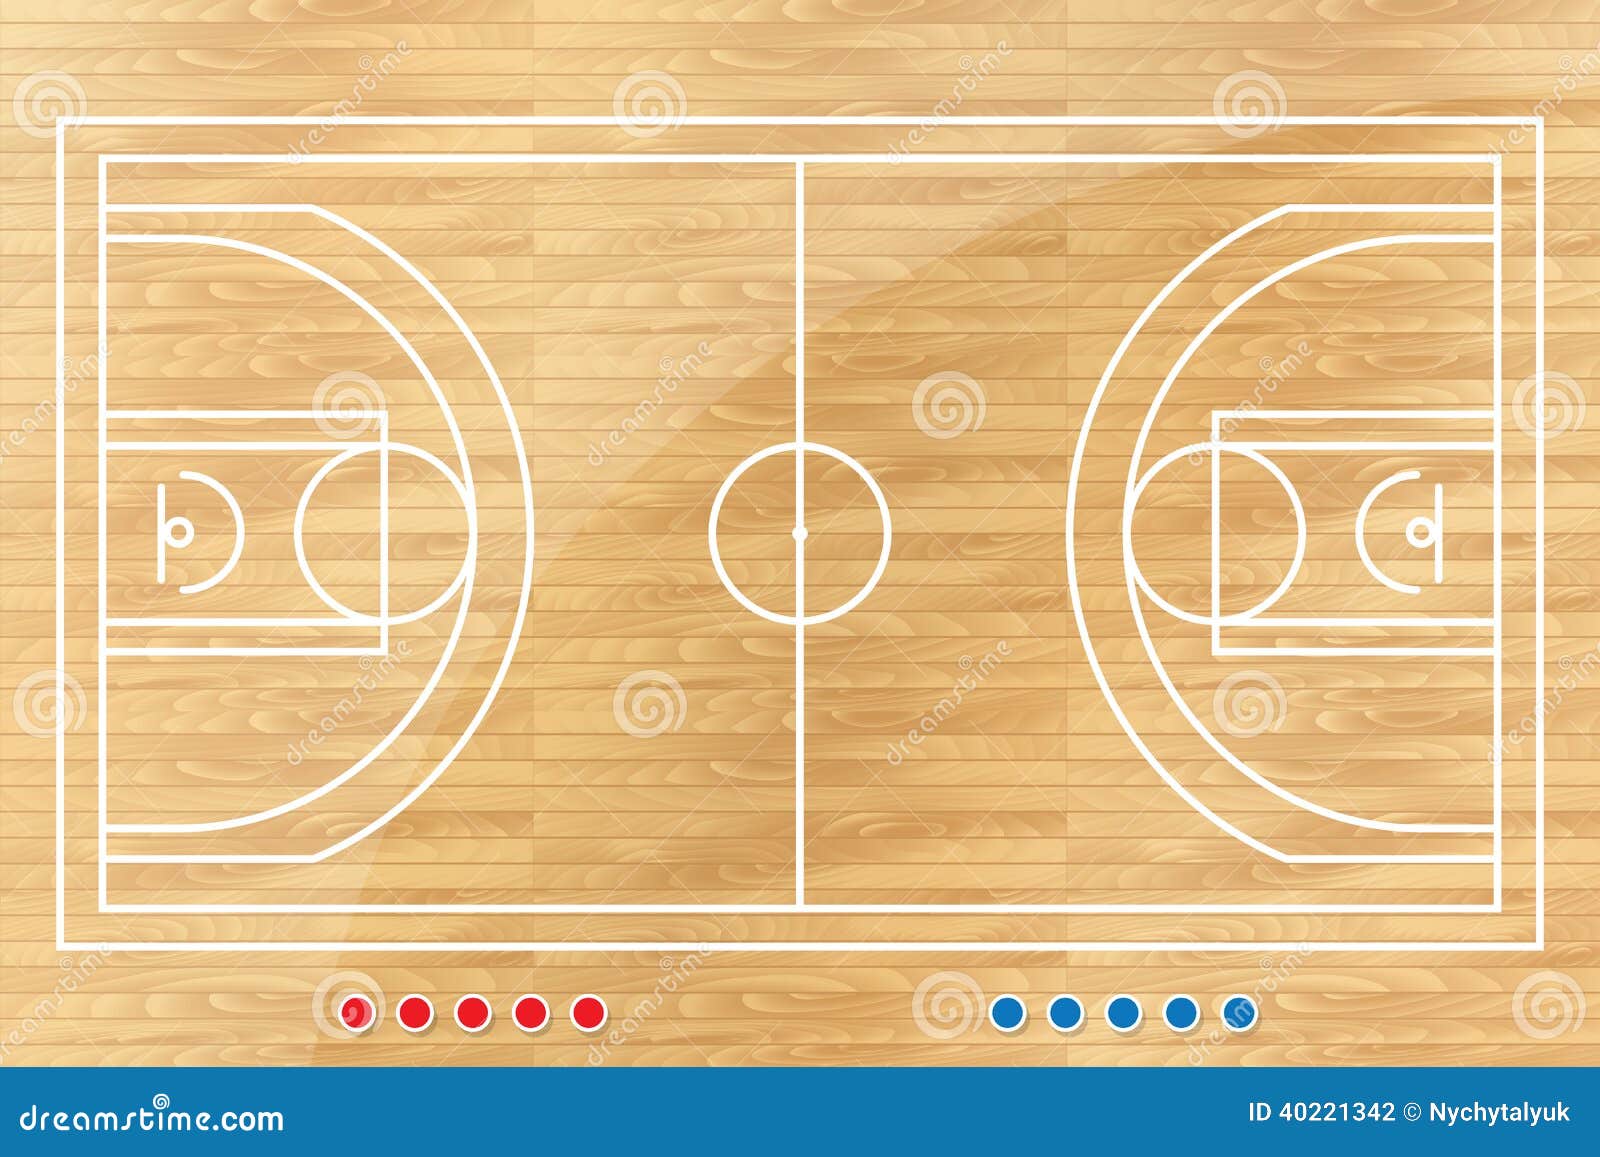 Basketball Tactic Table with Marks. Stock Vector - Illustration of  basketball, marker: 40221342